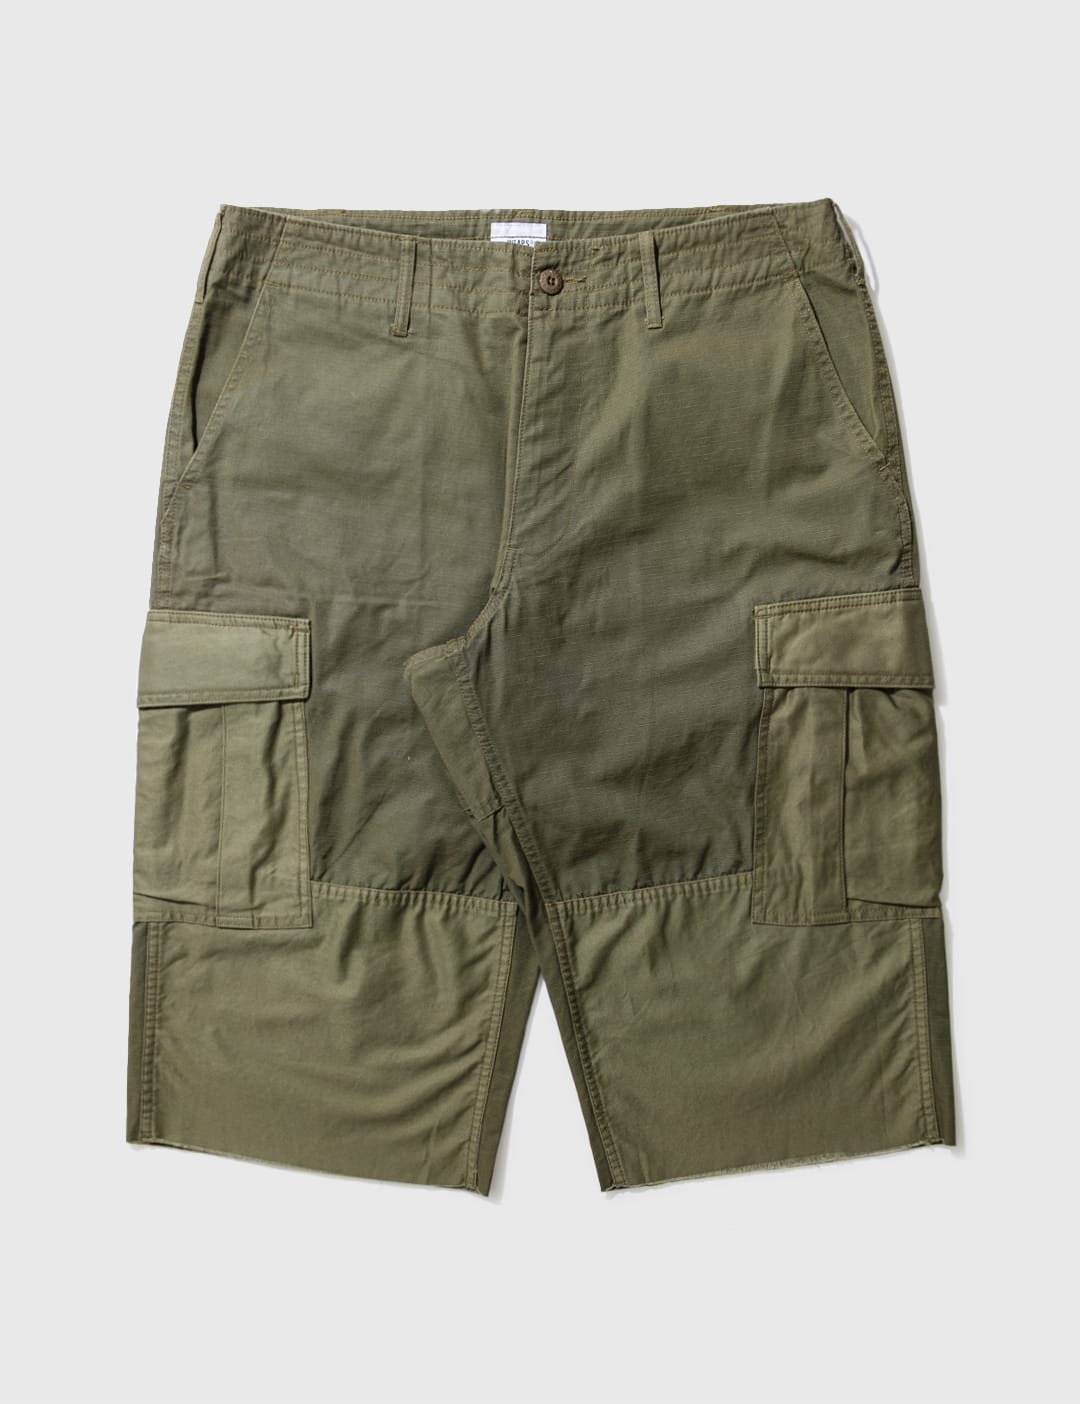 WTAPS - Wtaps 2 pockets Cargo Shorts | HBX - Globally Curated Fashion and  Lifestyle by Hypebeast